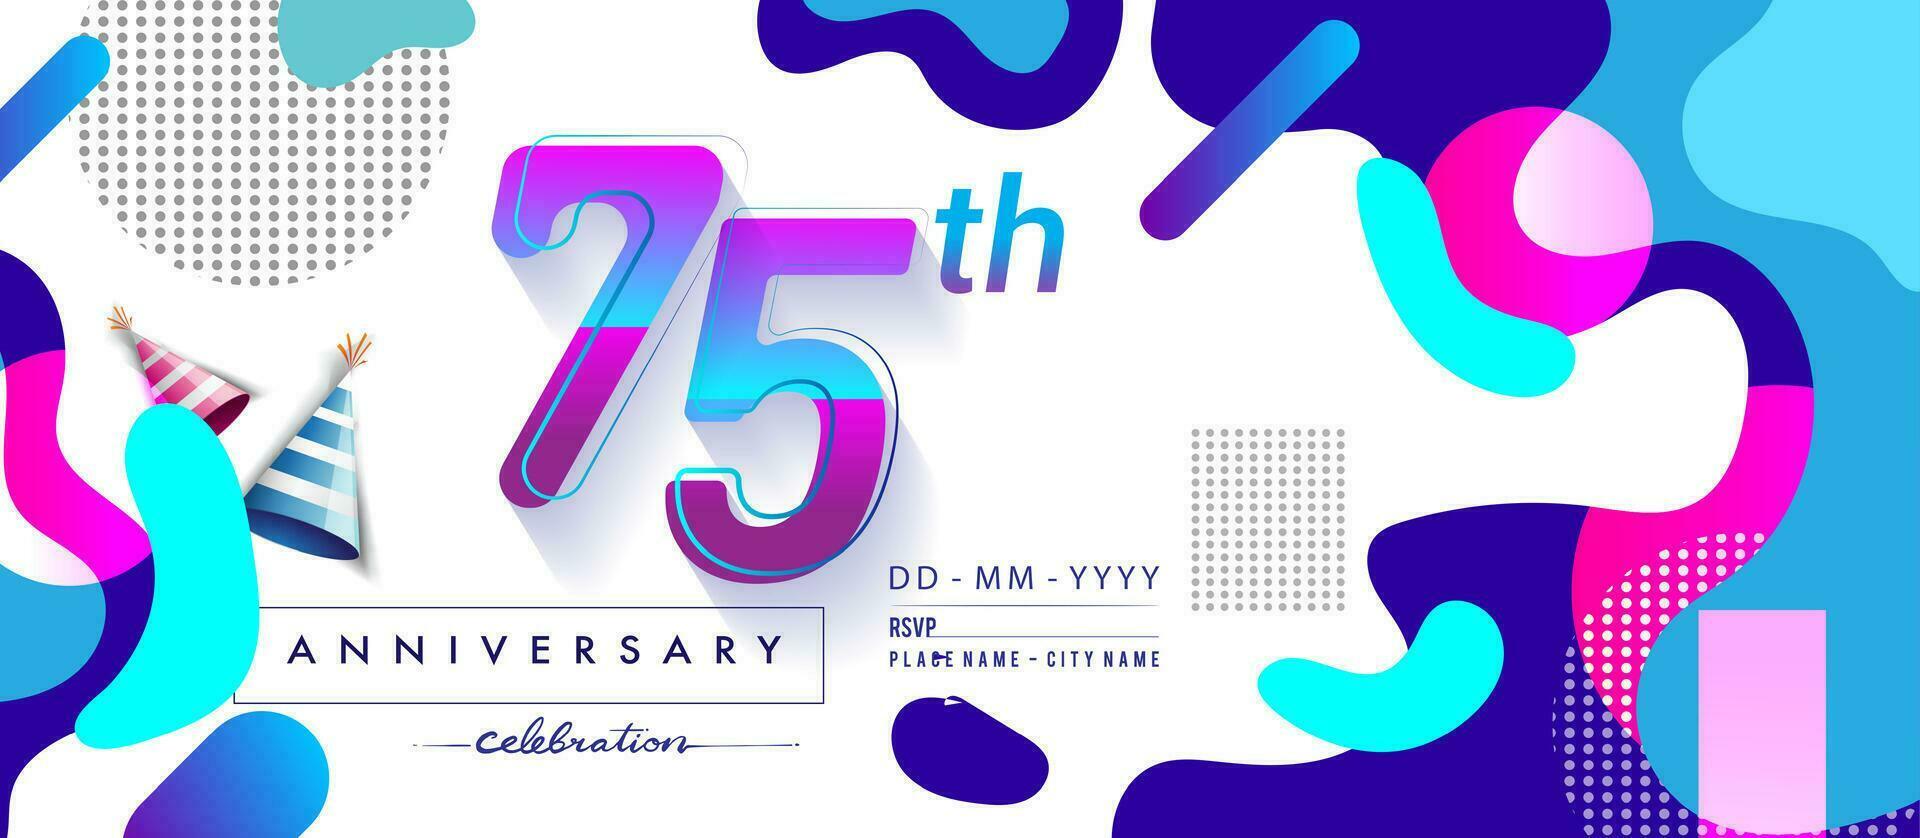 75th years anniversary logo, vector design birthday celebration with colorful geometric background and circles shape.